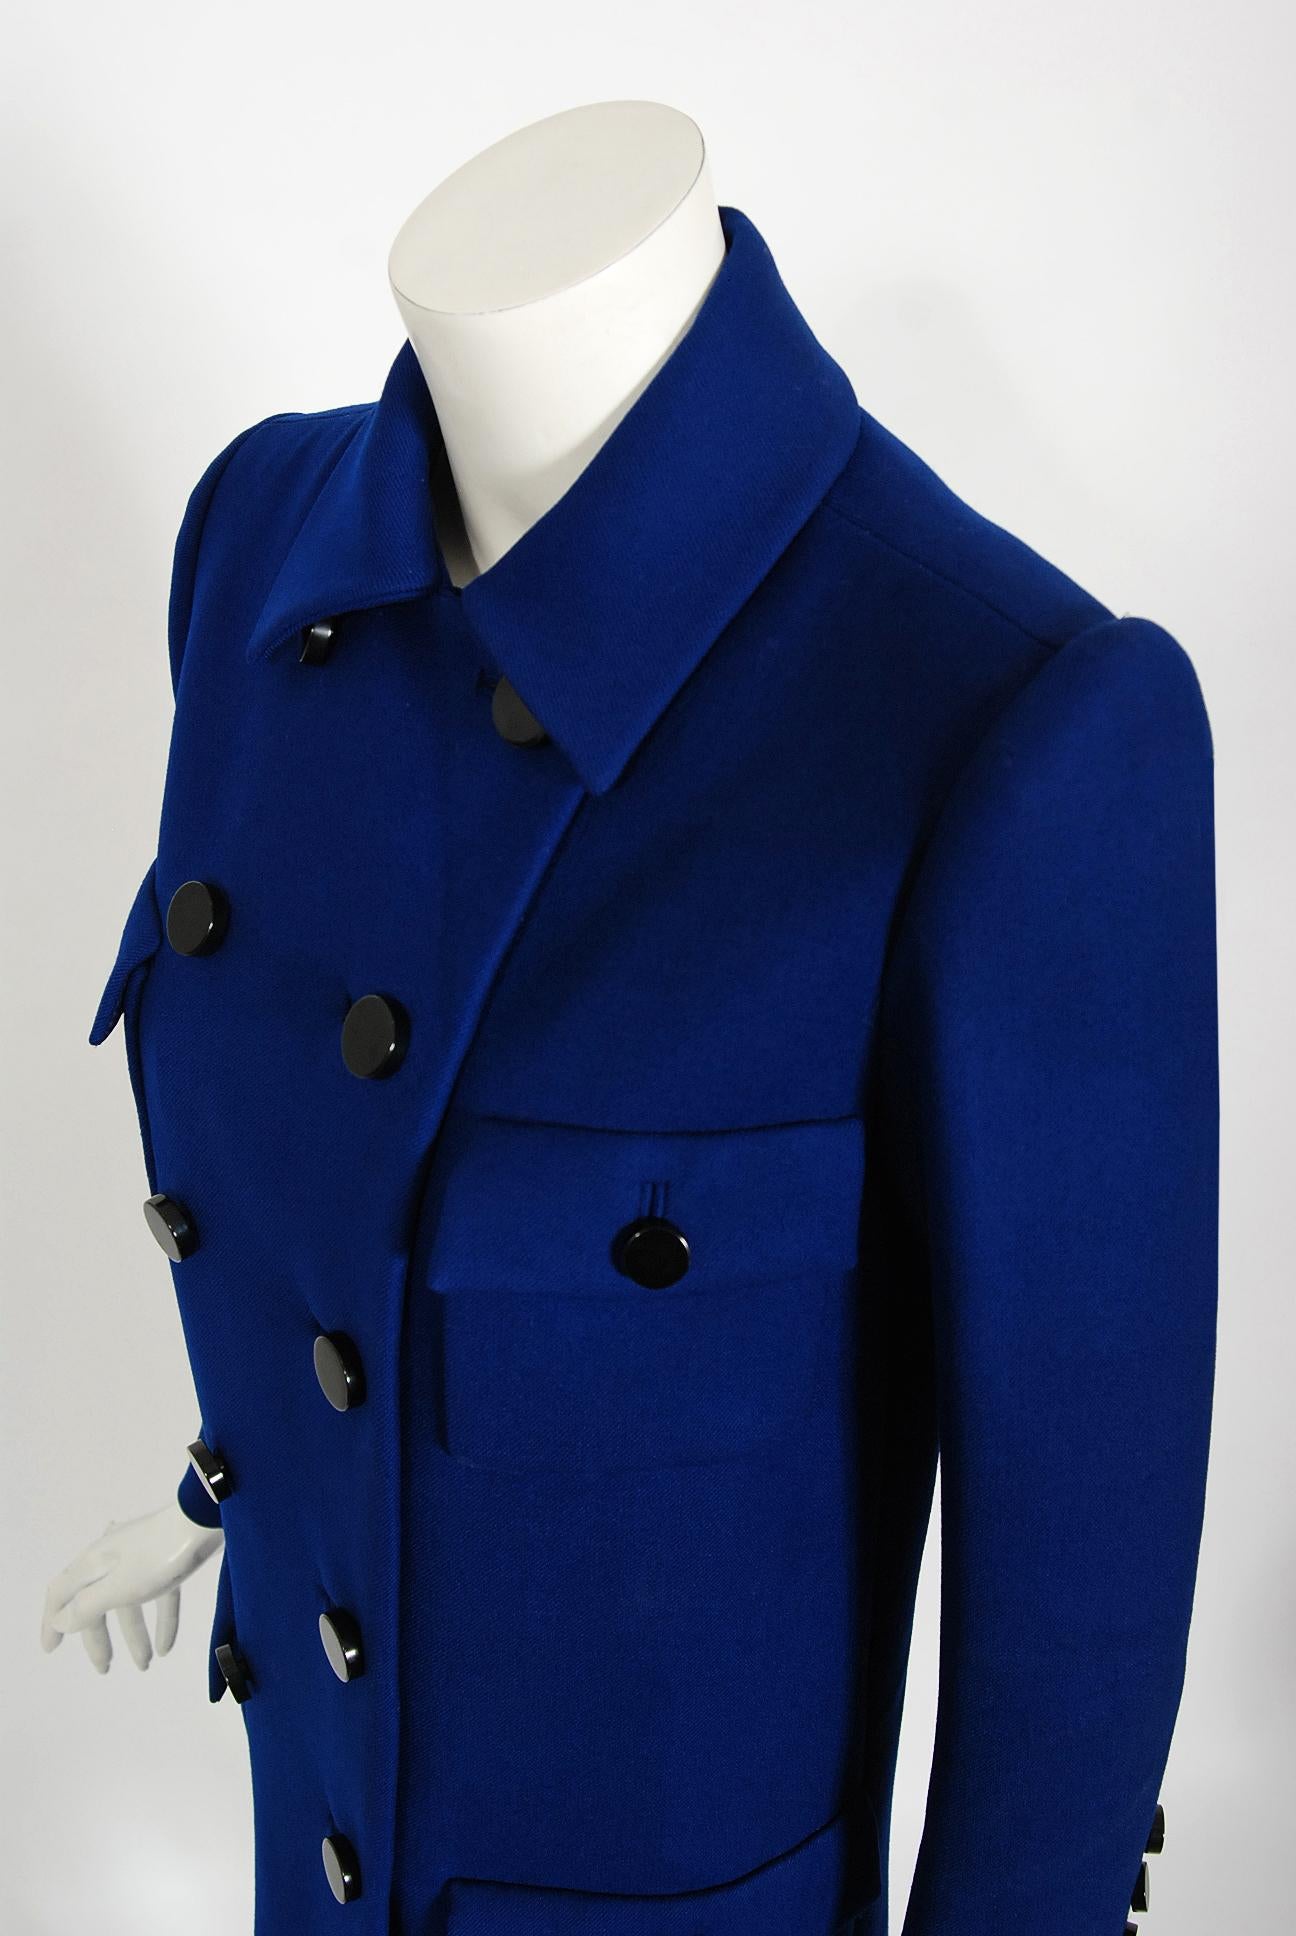 Black Vintage 1969 Norman Norell Royal Blue Wool Double-Breasted Mod Military Coat For Sale